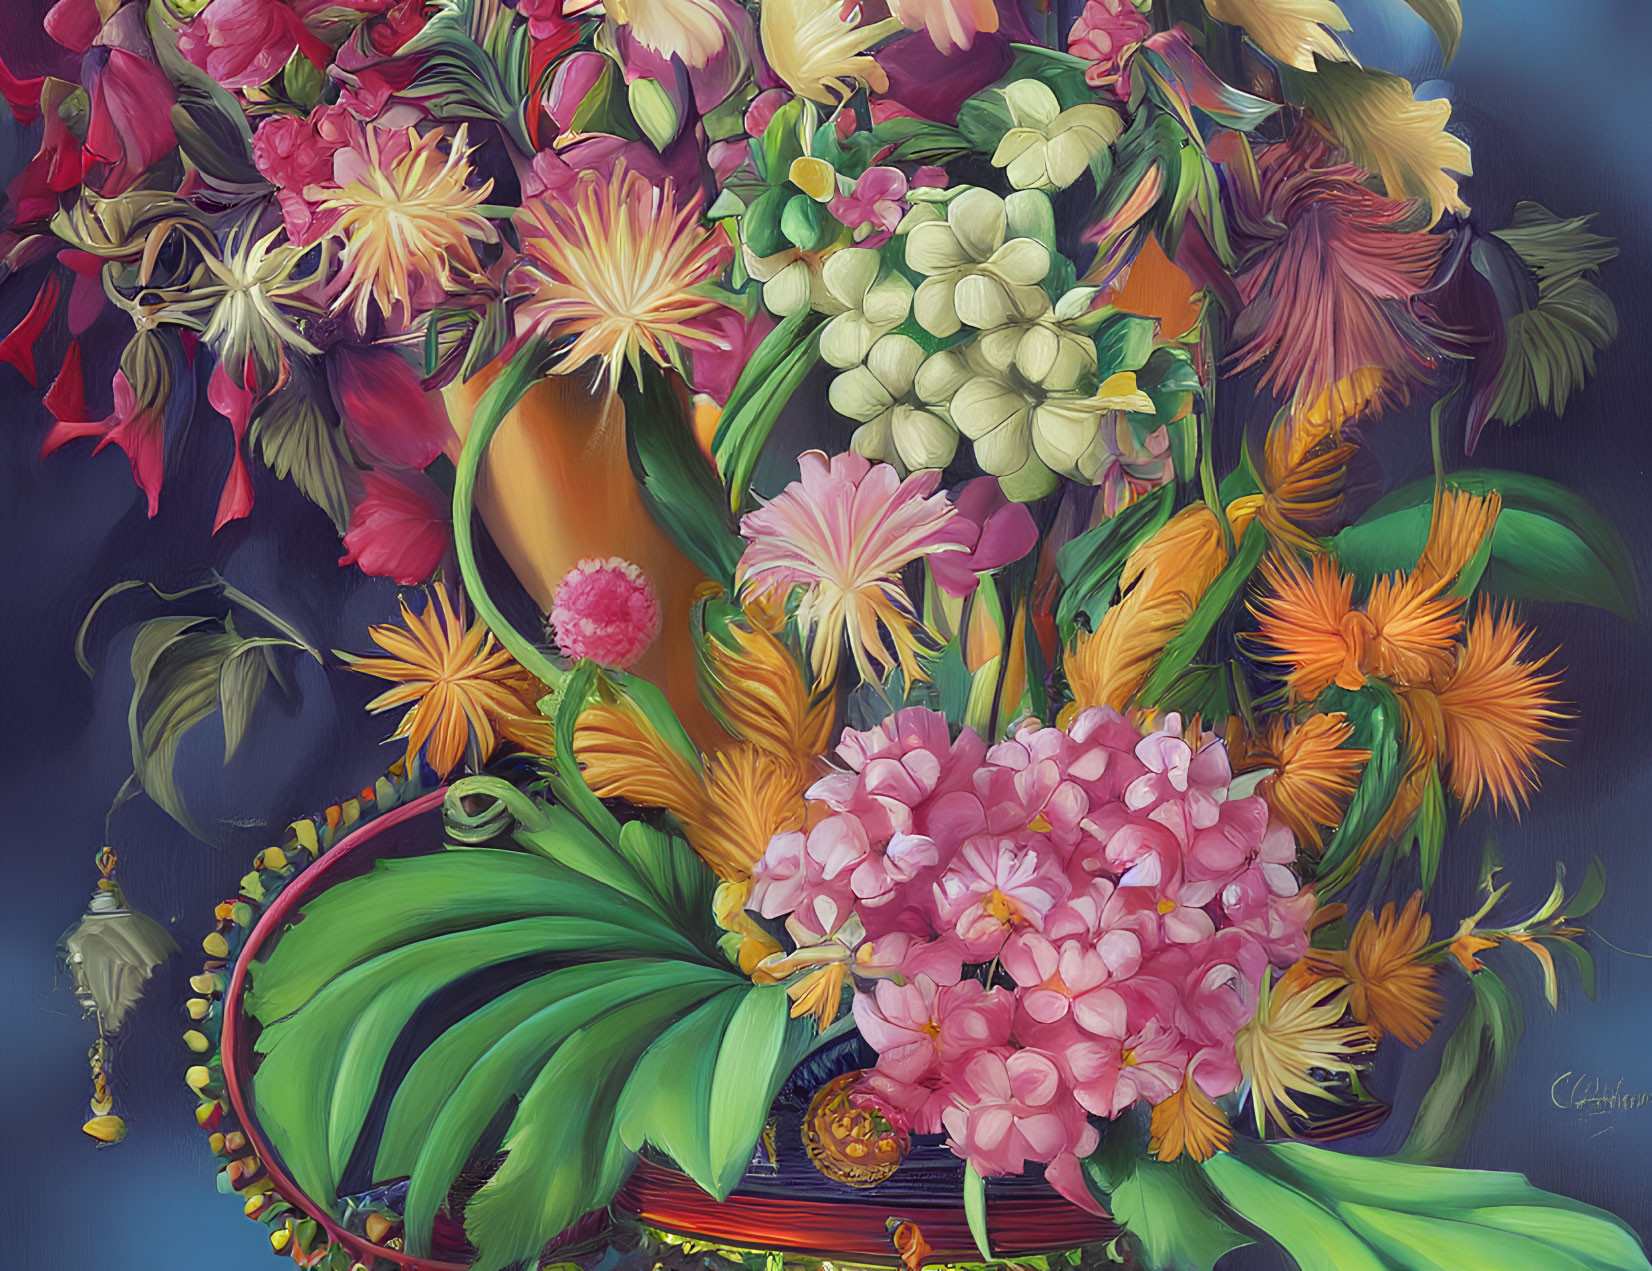 Colorful Bouquet Painting Against Dark Background